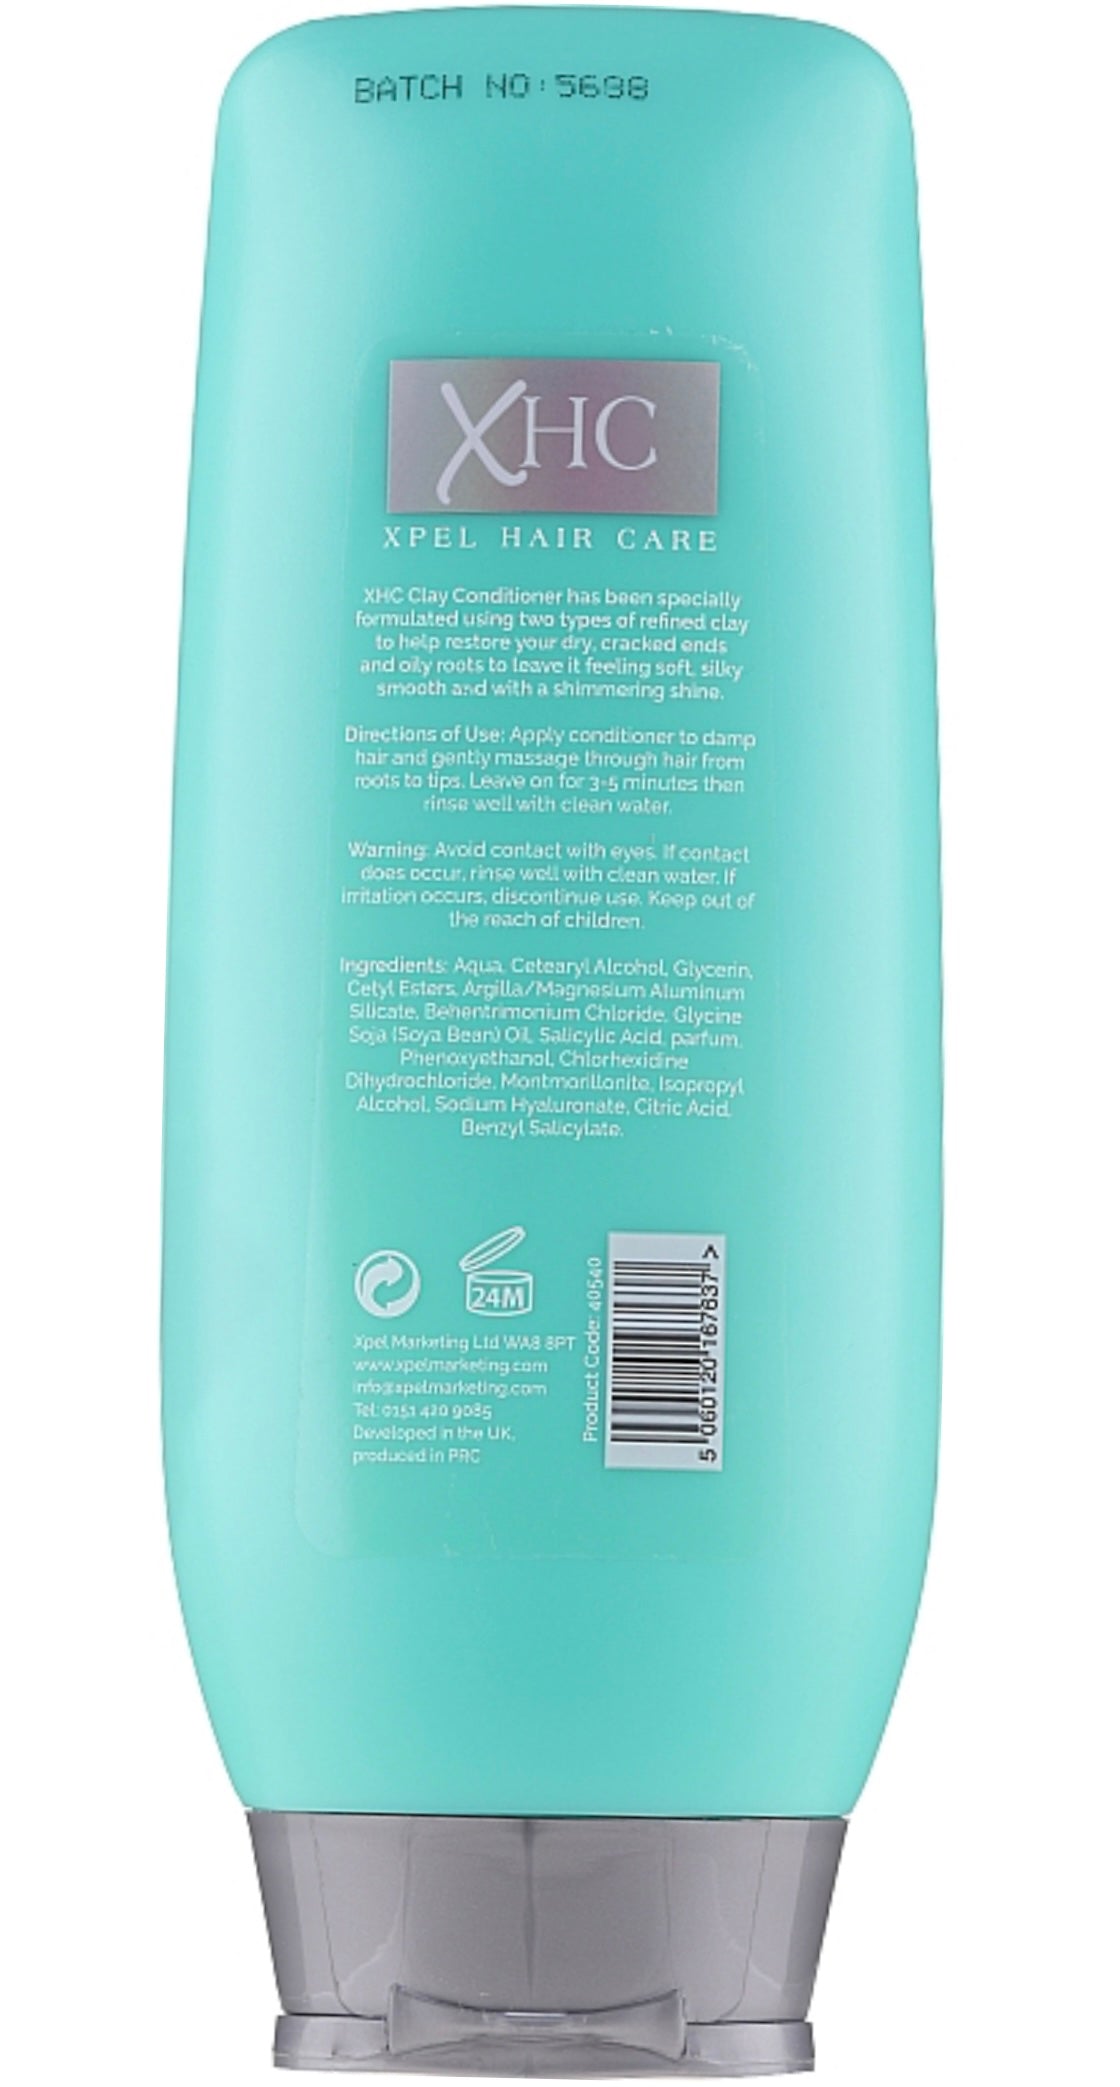 XHC Xpel Hair Care Restoring Clay Conditioner